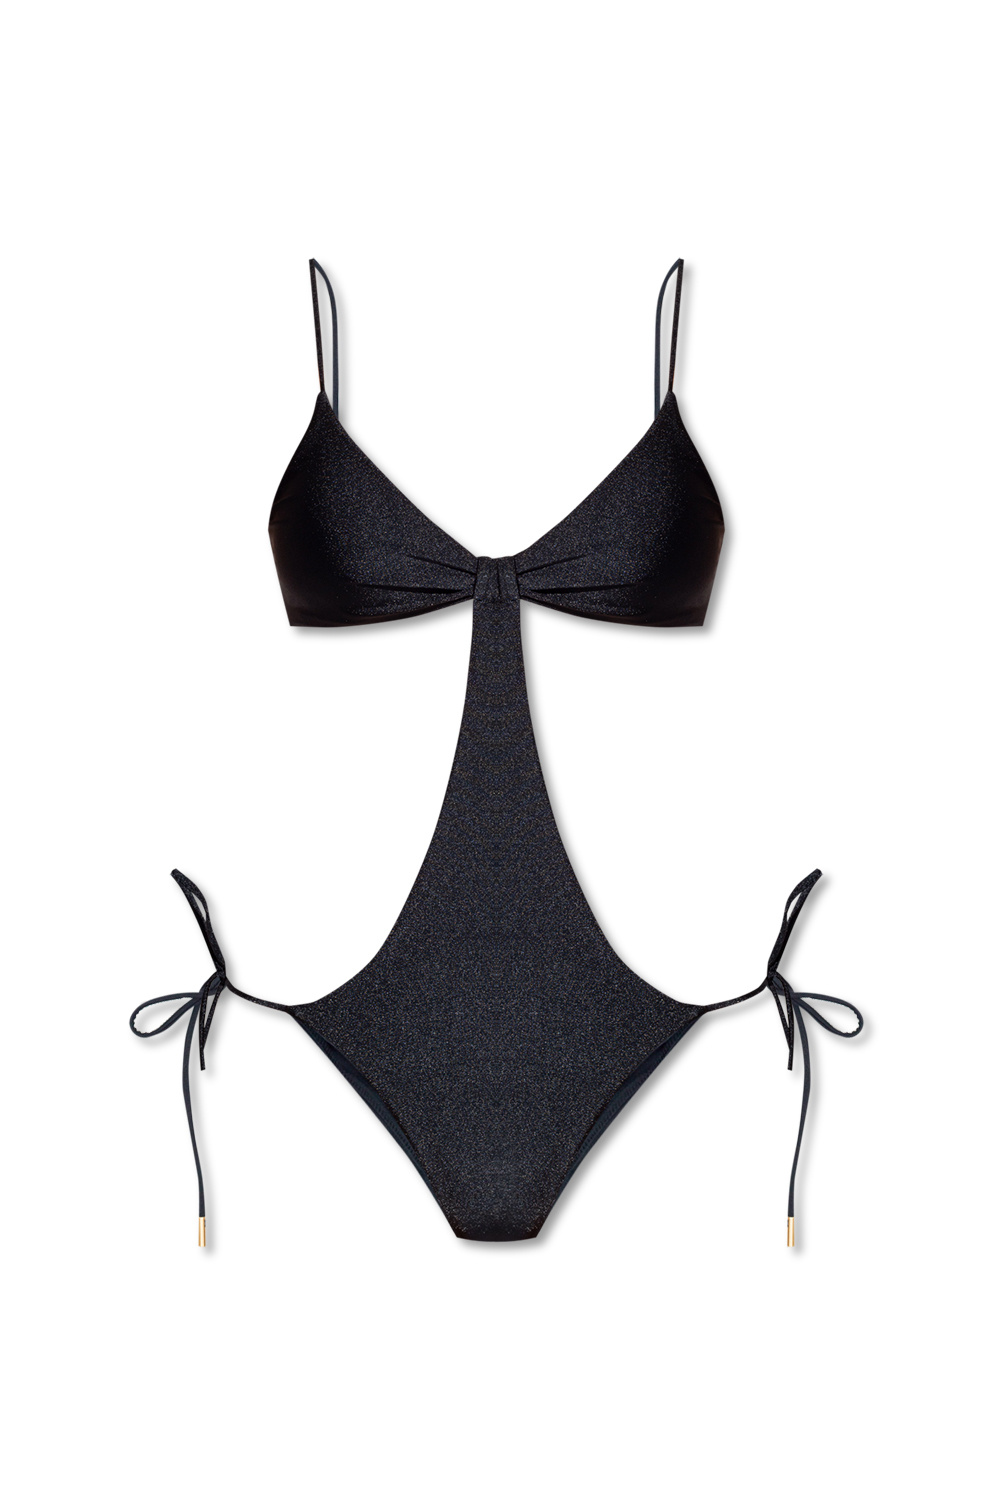 Cult Gaia ‘Teo’ one-piece swimsuit